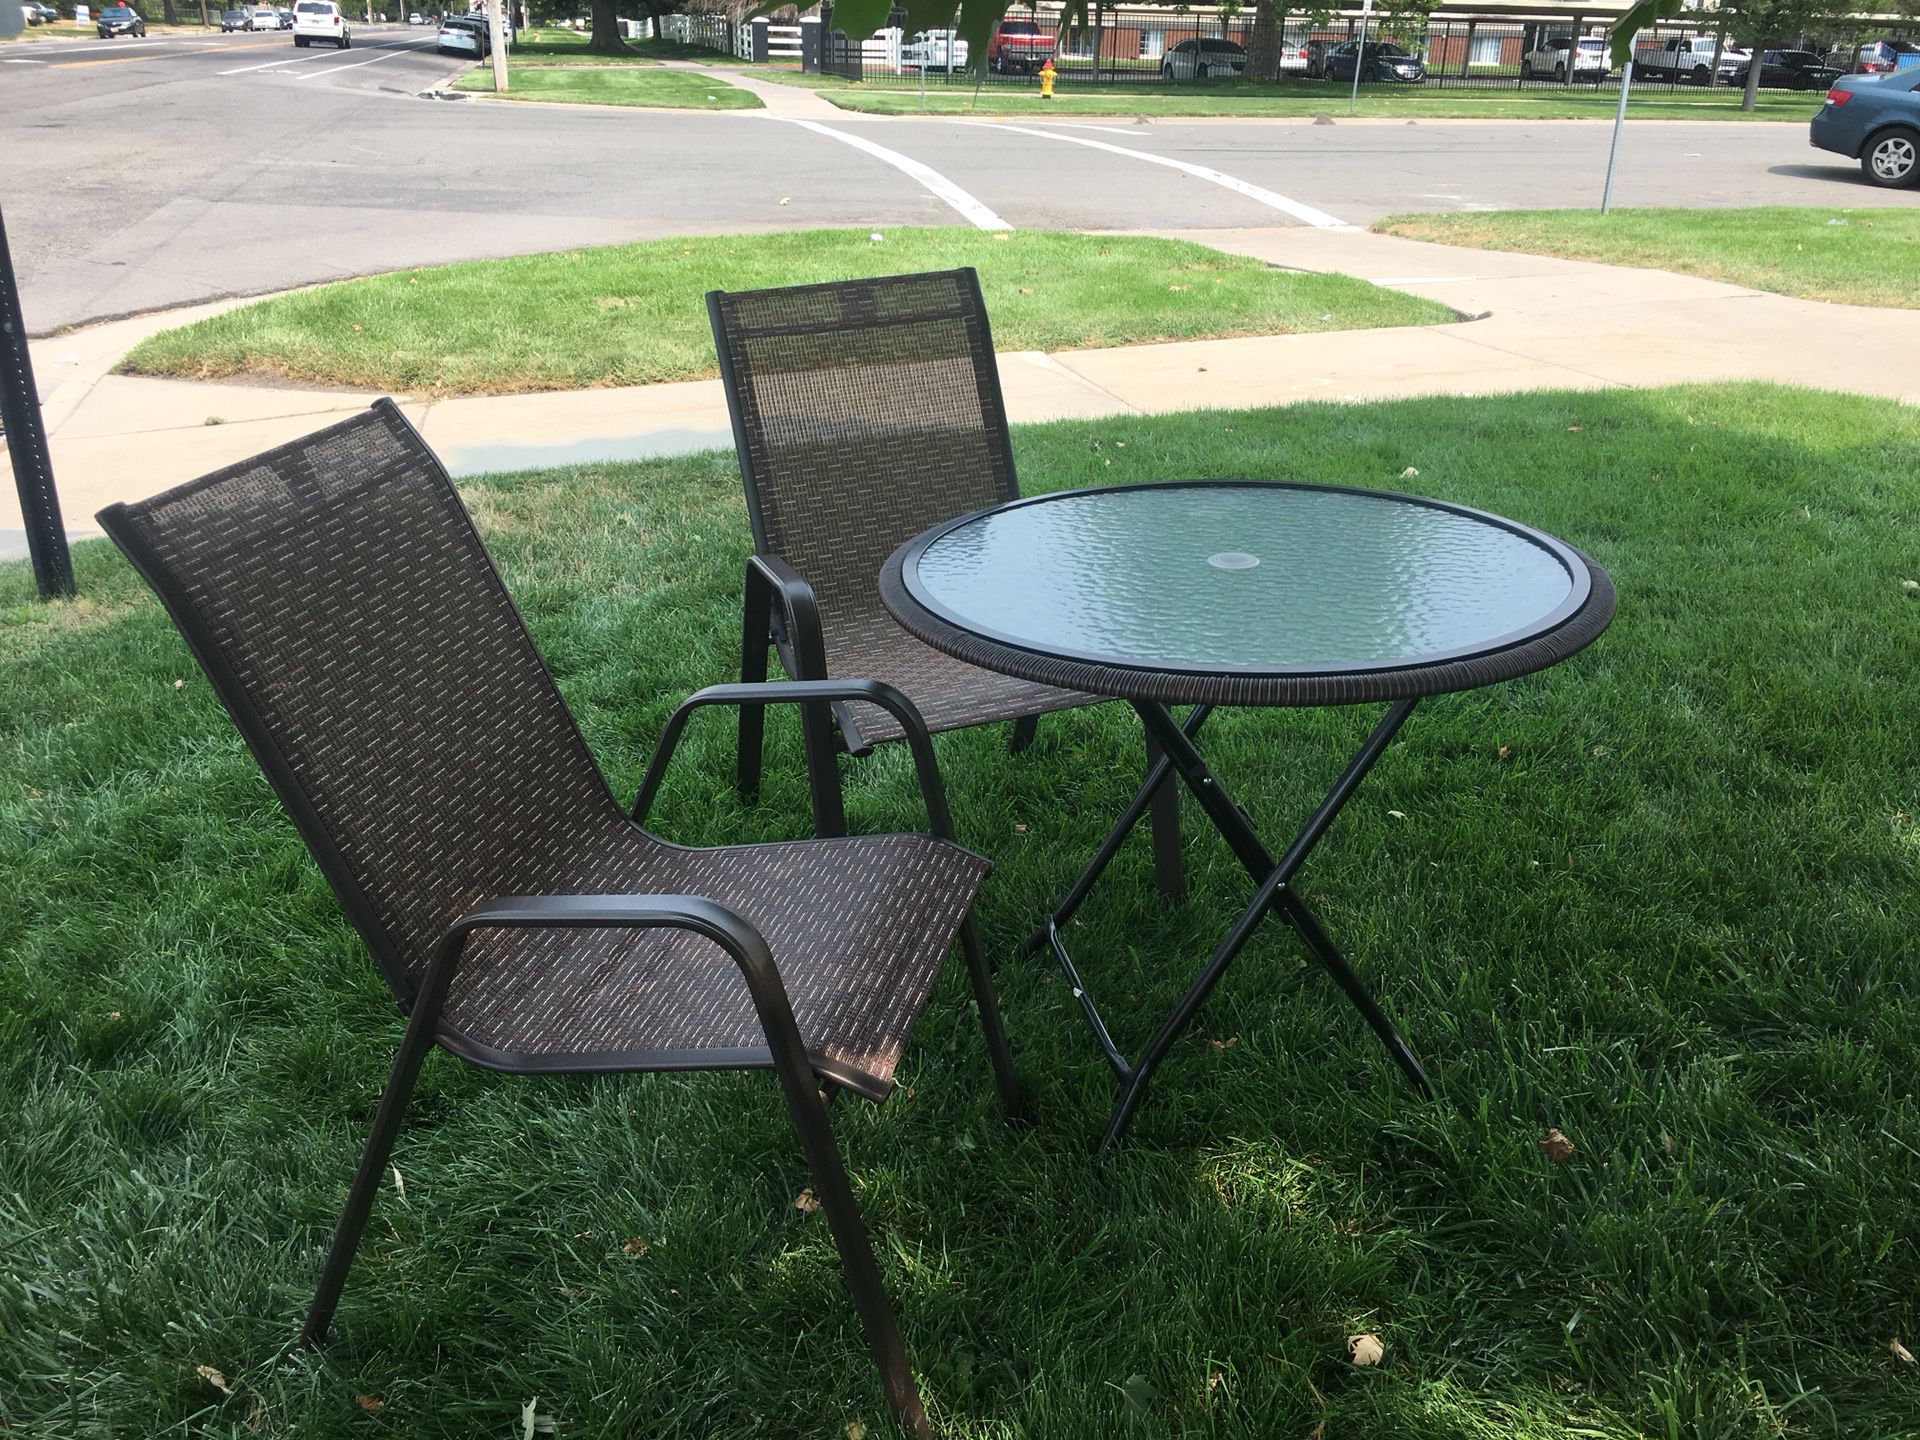 4 Chair and Table set